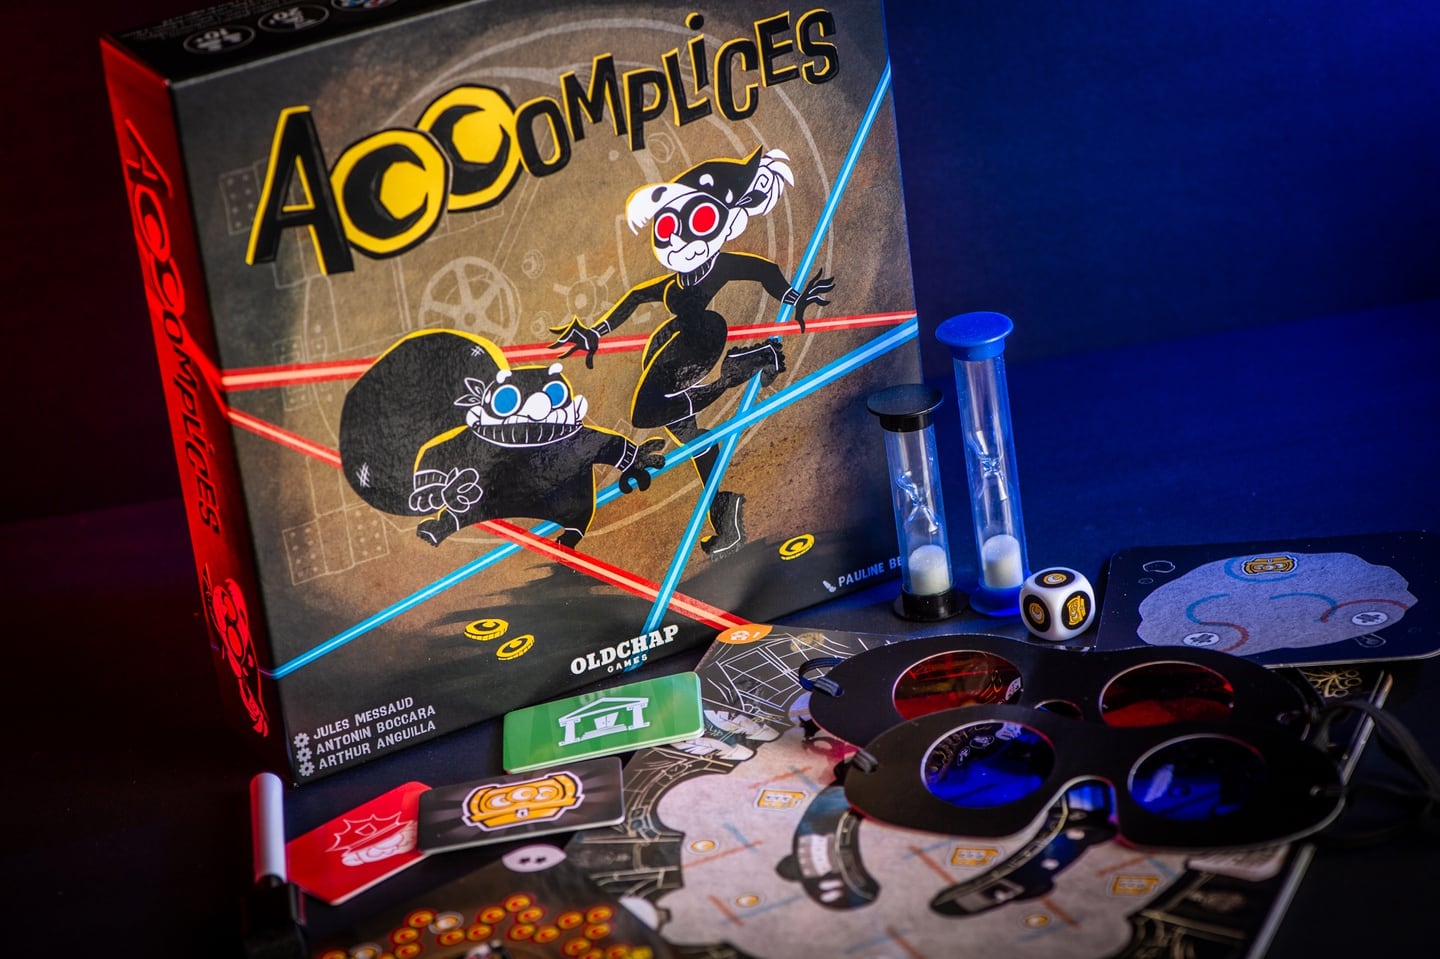 The accomplice game